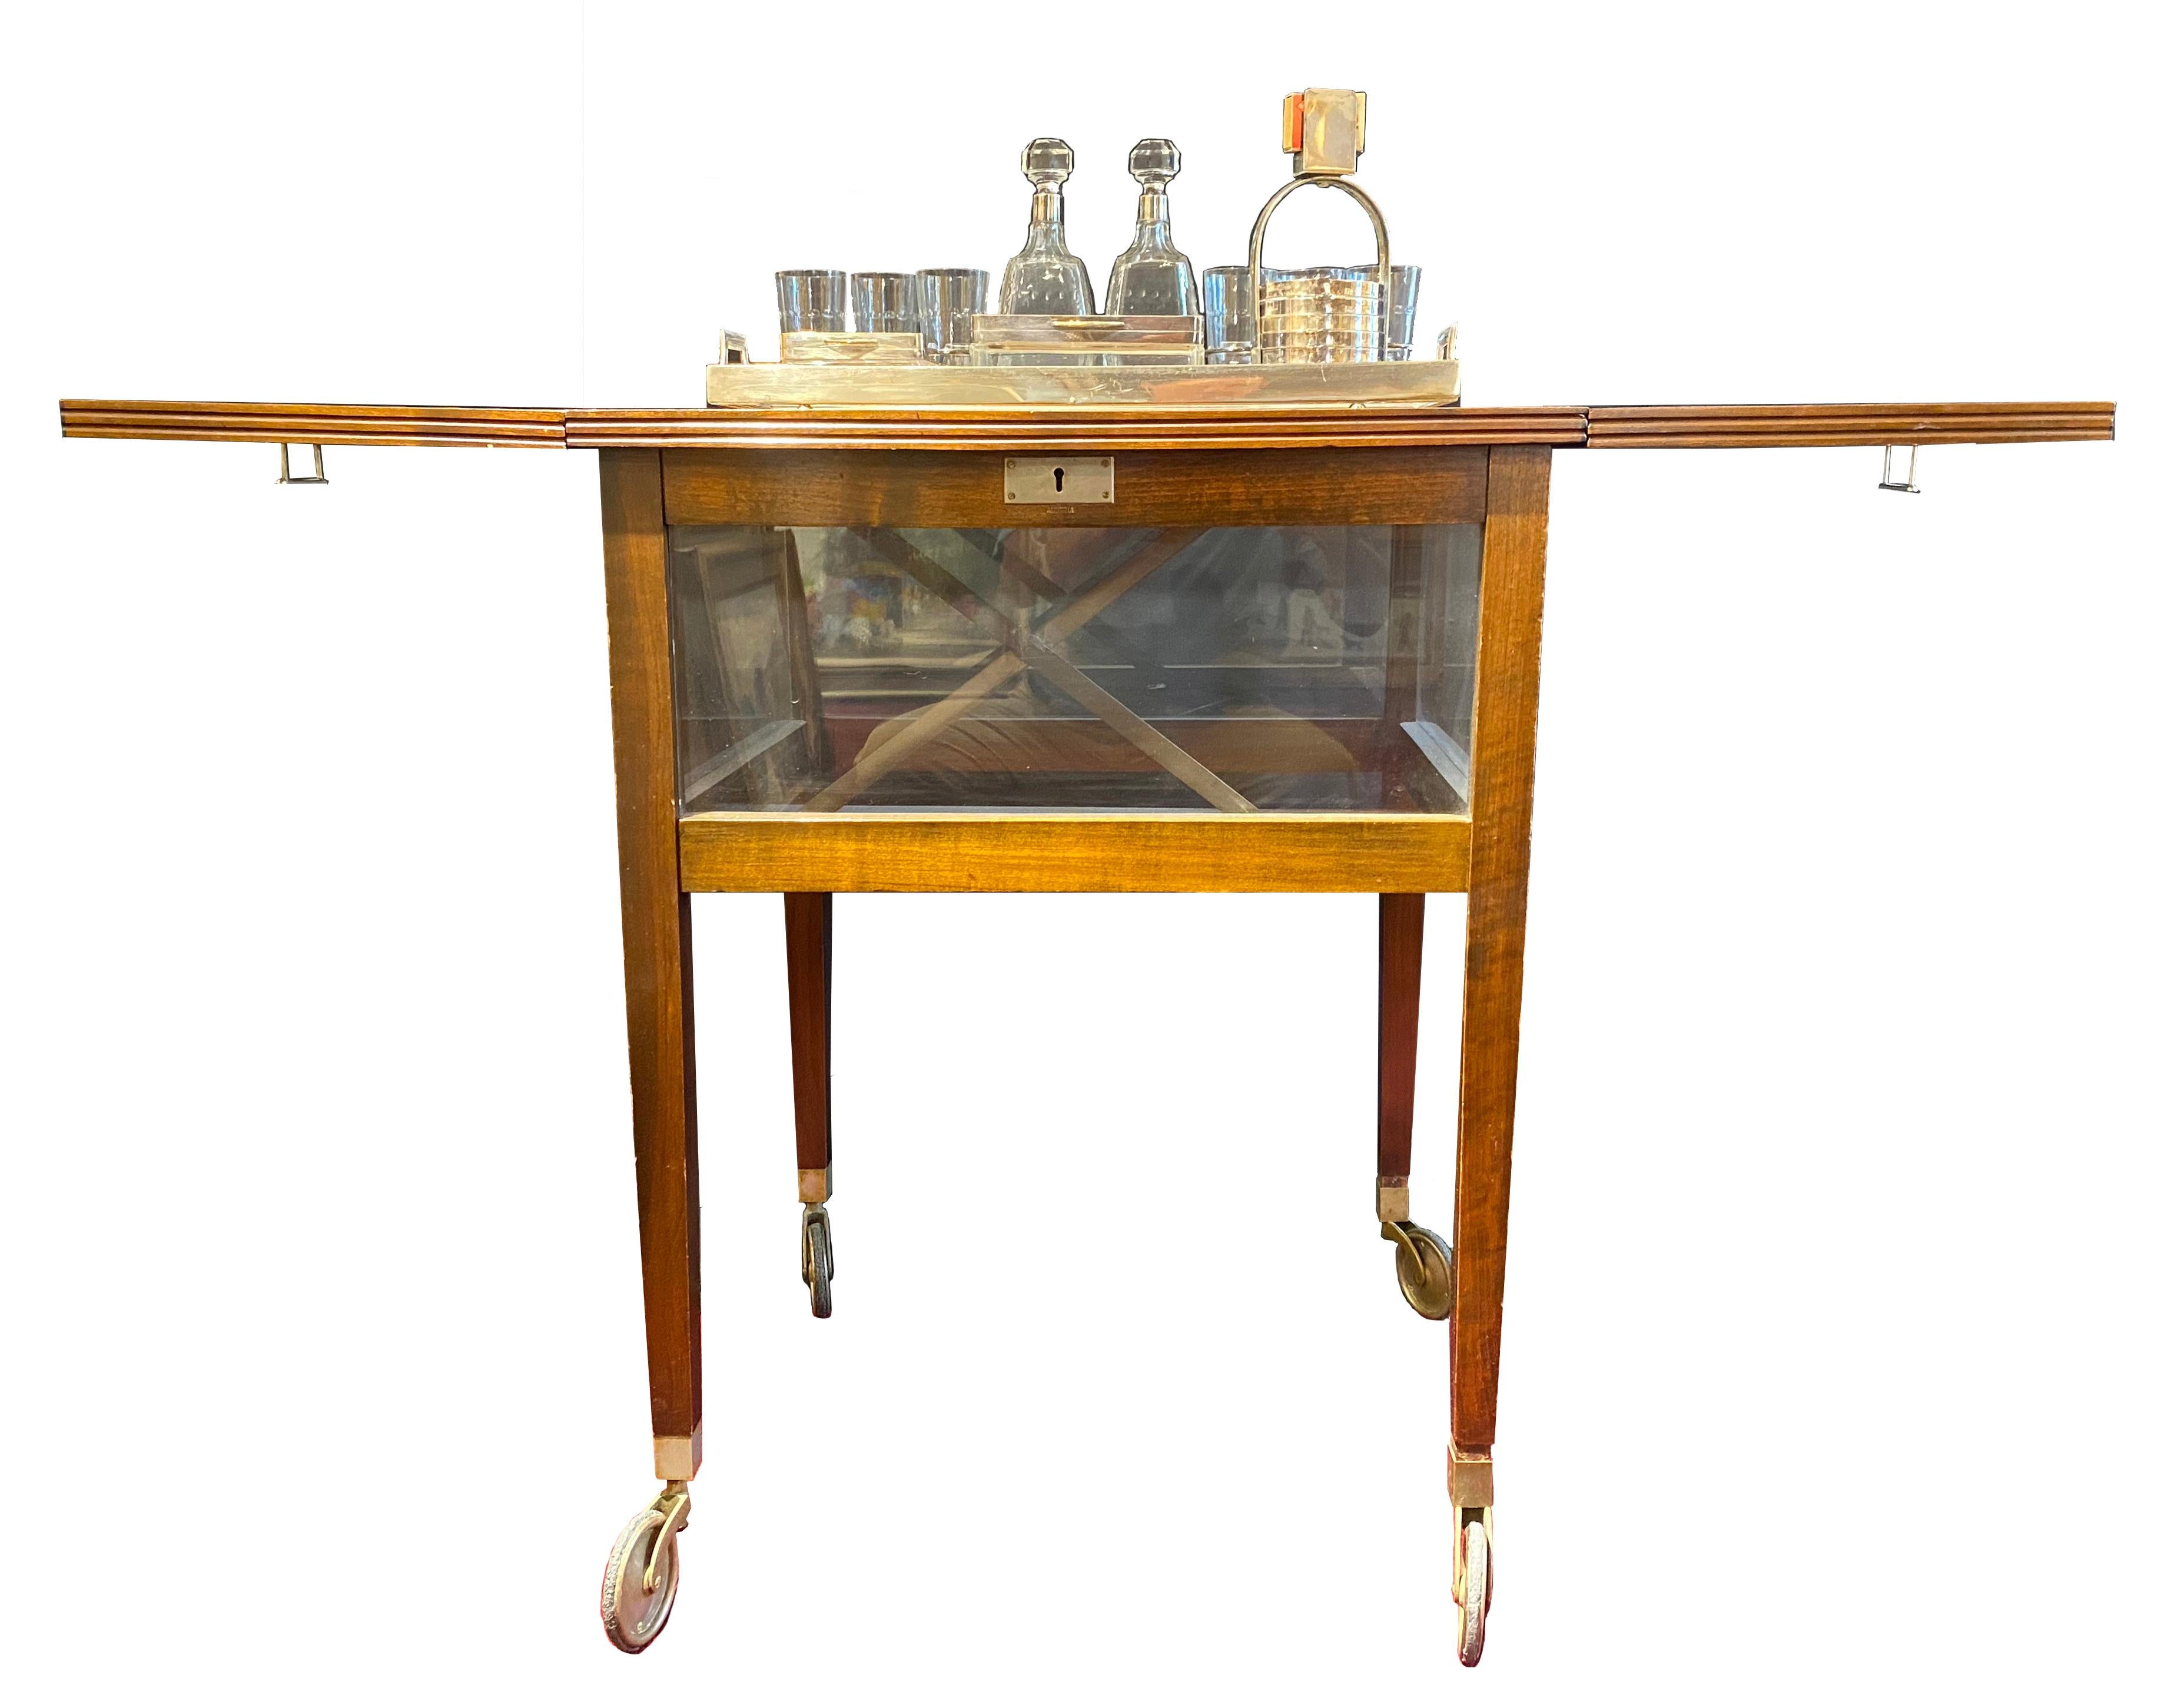 George III Style Mechanical Drinks and Smoking Cabinet (Converts to Table)